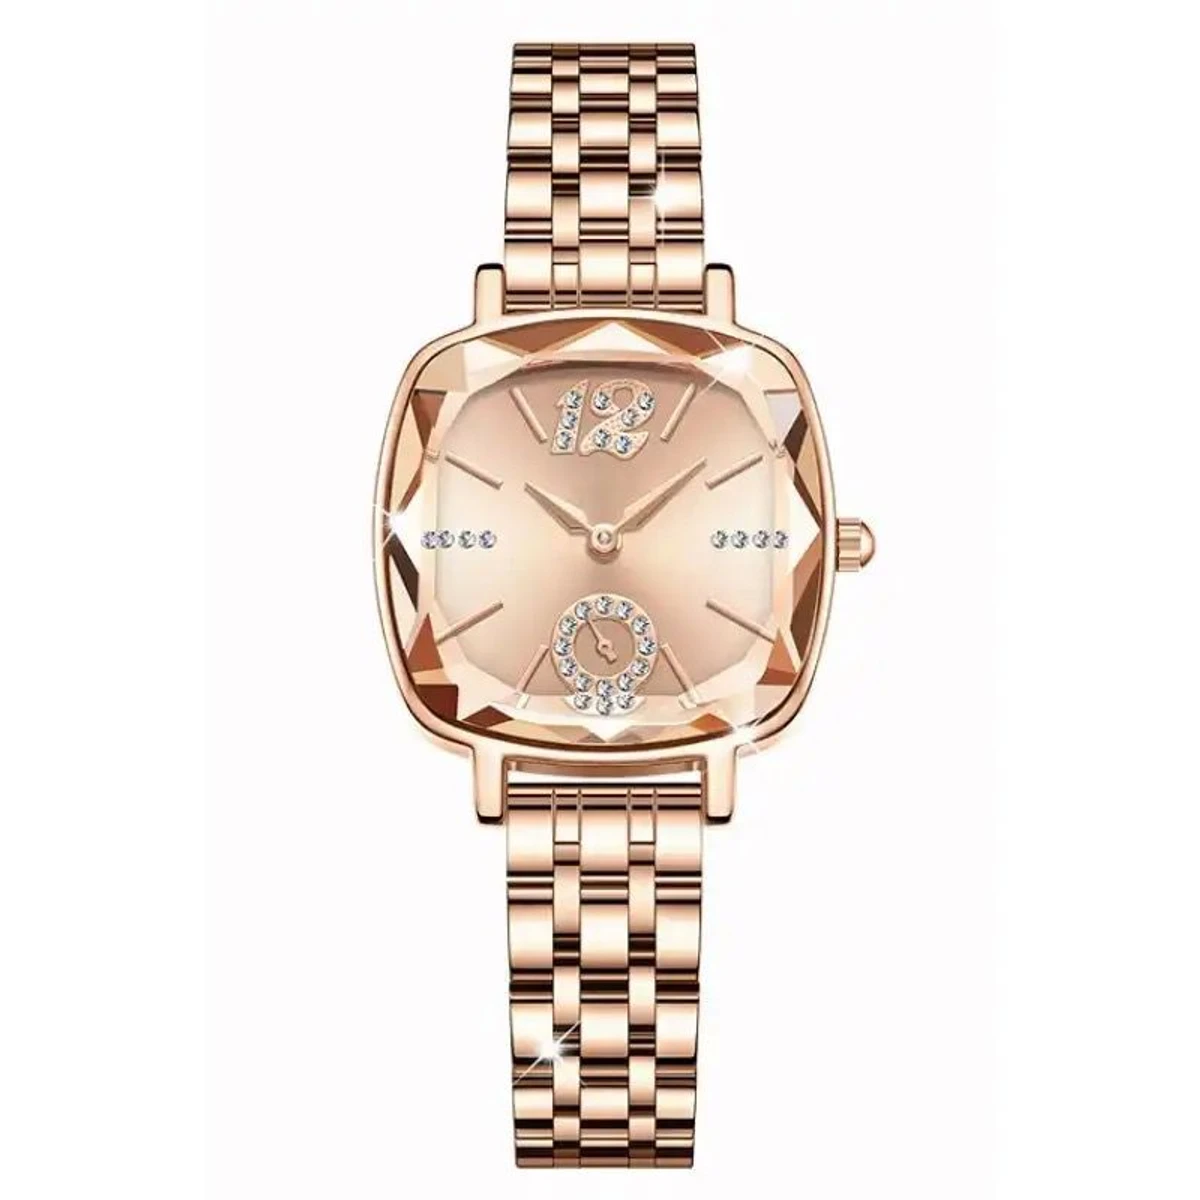 CRRJU Waterproof Ladies Wristwatch with Sparkling Rhinestone Dial and Stainless Steel Band- Light Coffee